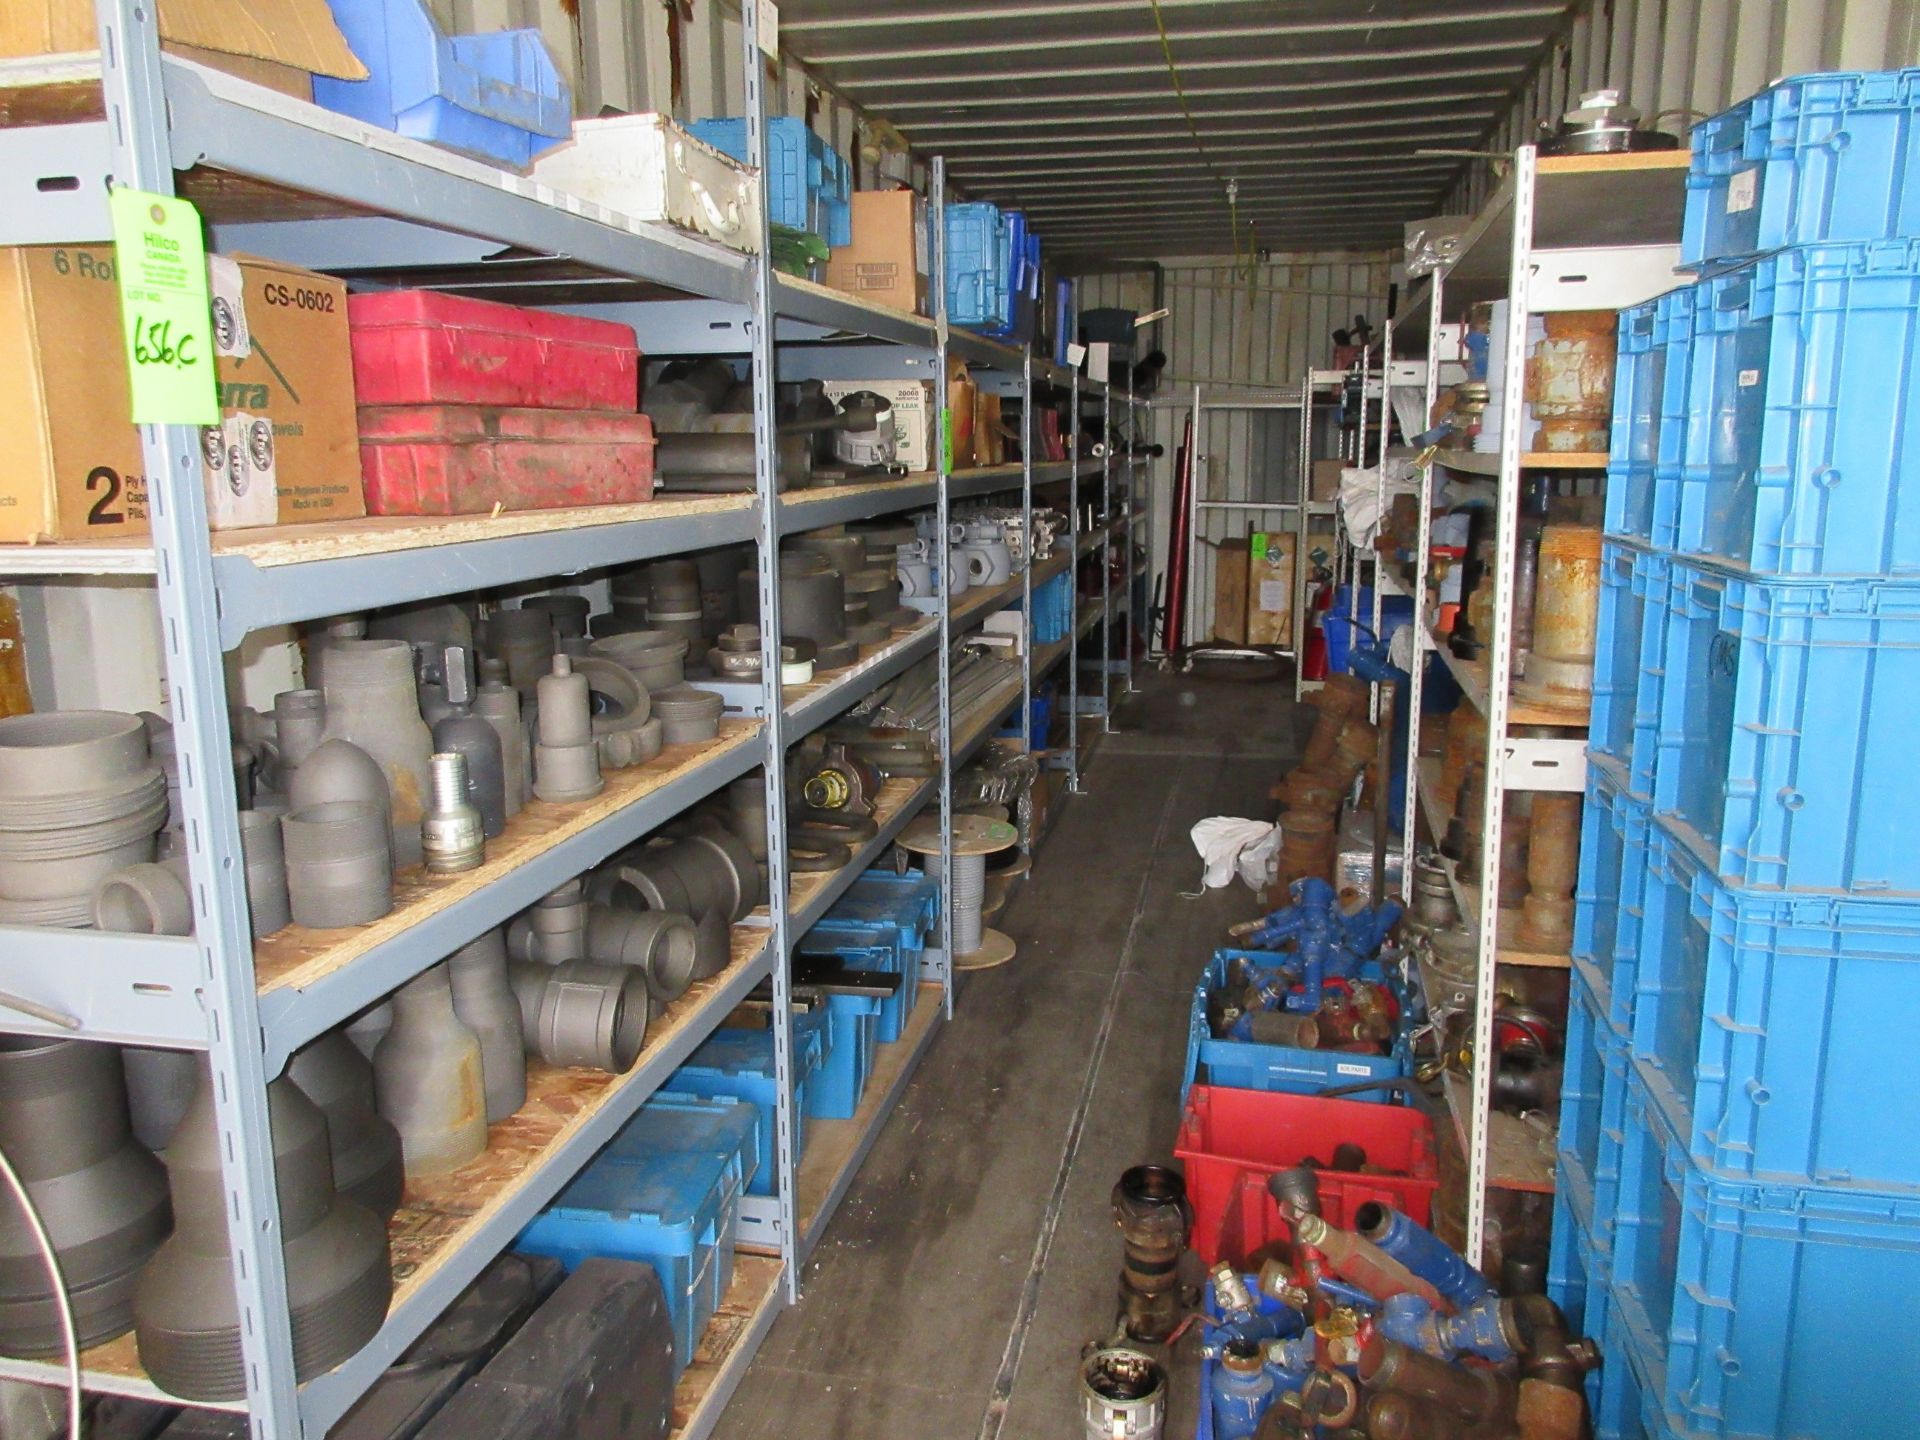 Remaining Contents of Sea Can, Misc. Parts, Shelving